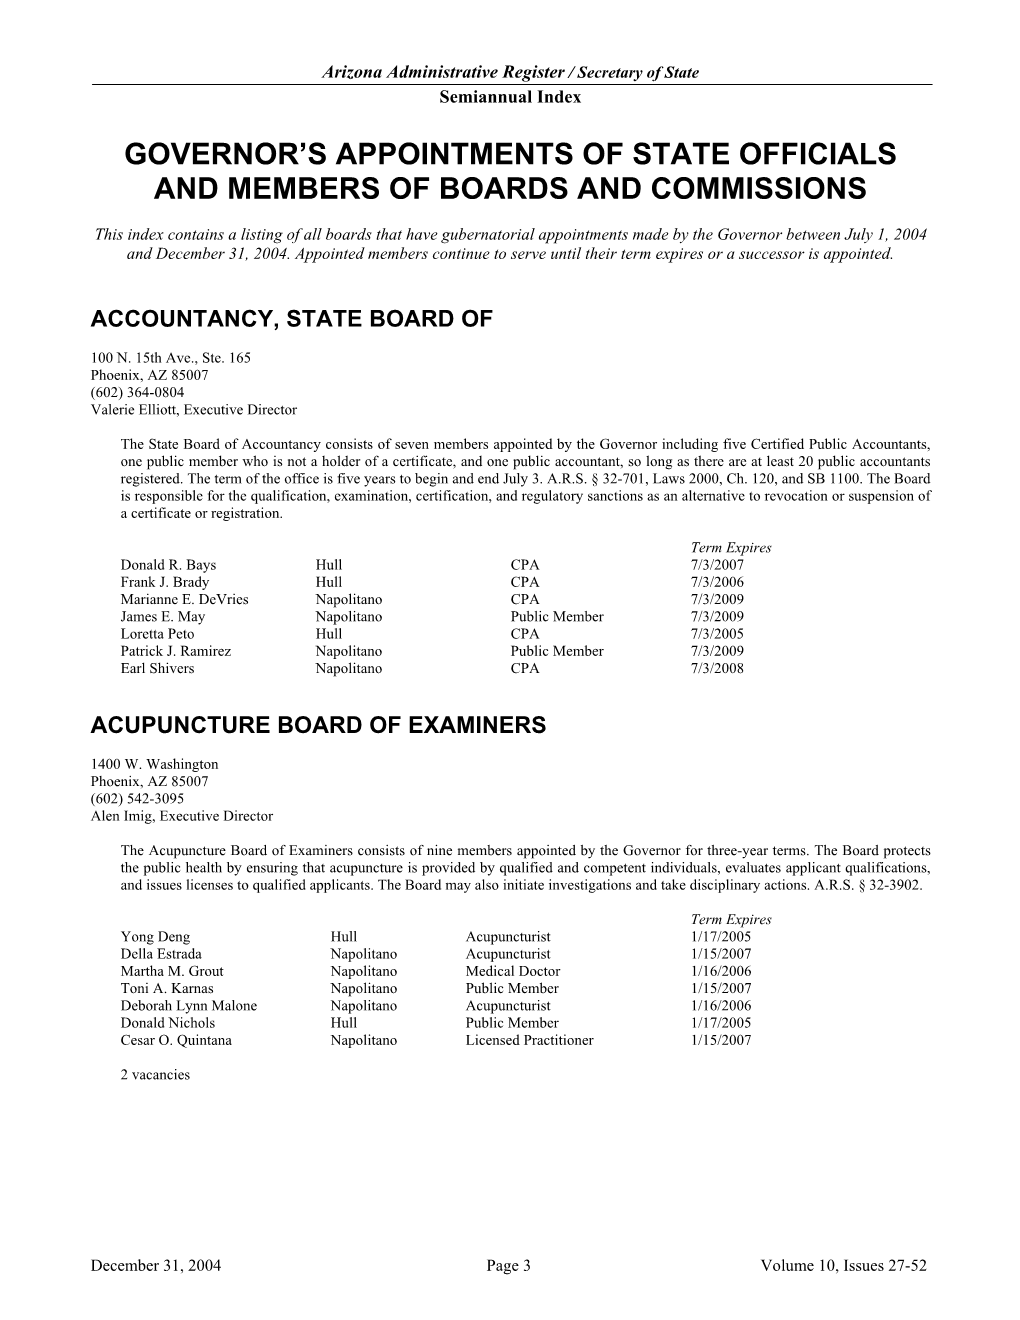 Governor's Appointments of State Officials and Members of Boards